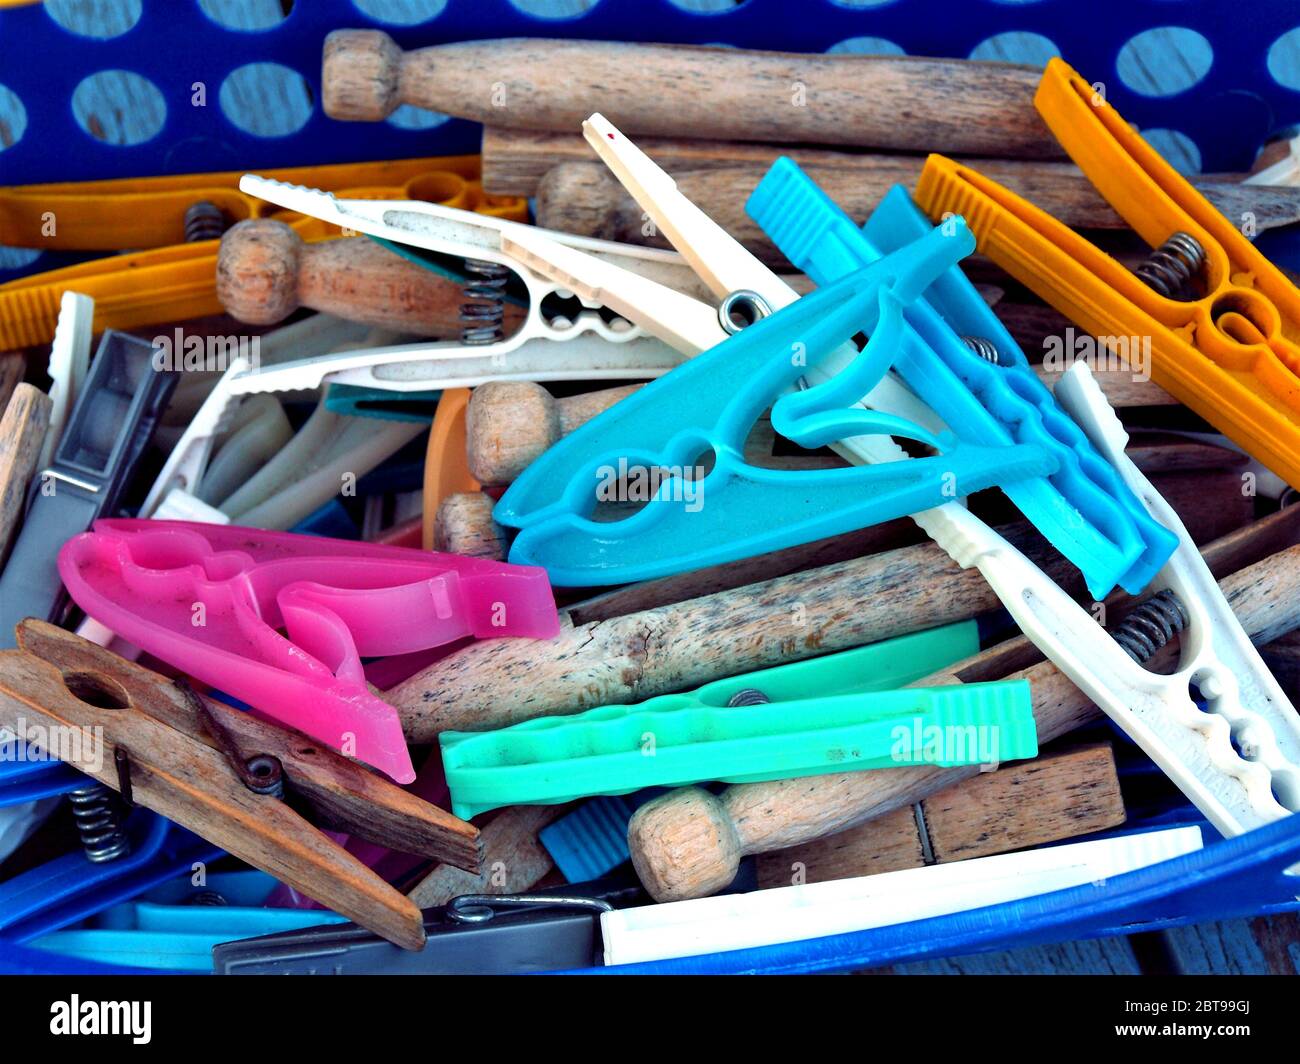 Sutton in Ashfield, Nottinghamshire, UK. July 23, 2010. Variety of plastic and wooden clothes pegs in the peg basket ready to peg washing to dry at Su Stock Photo